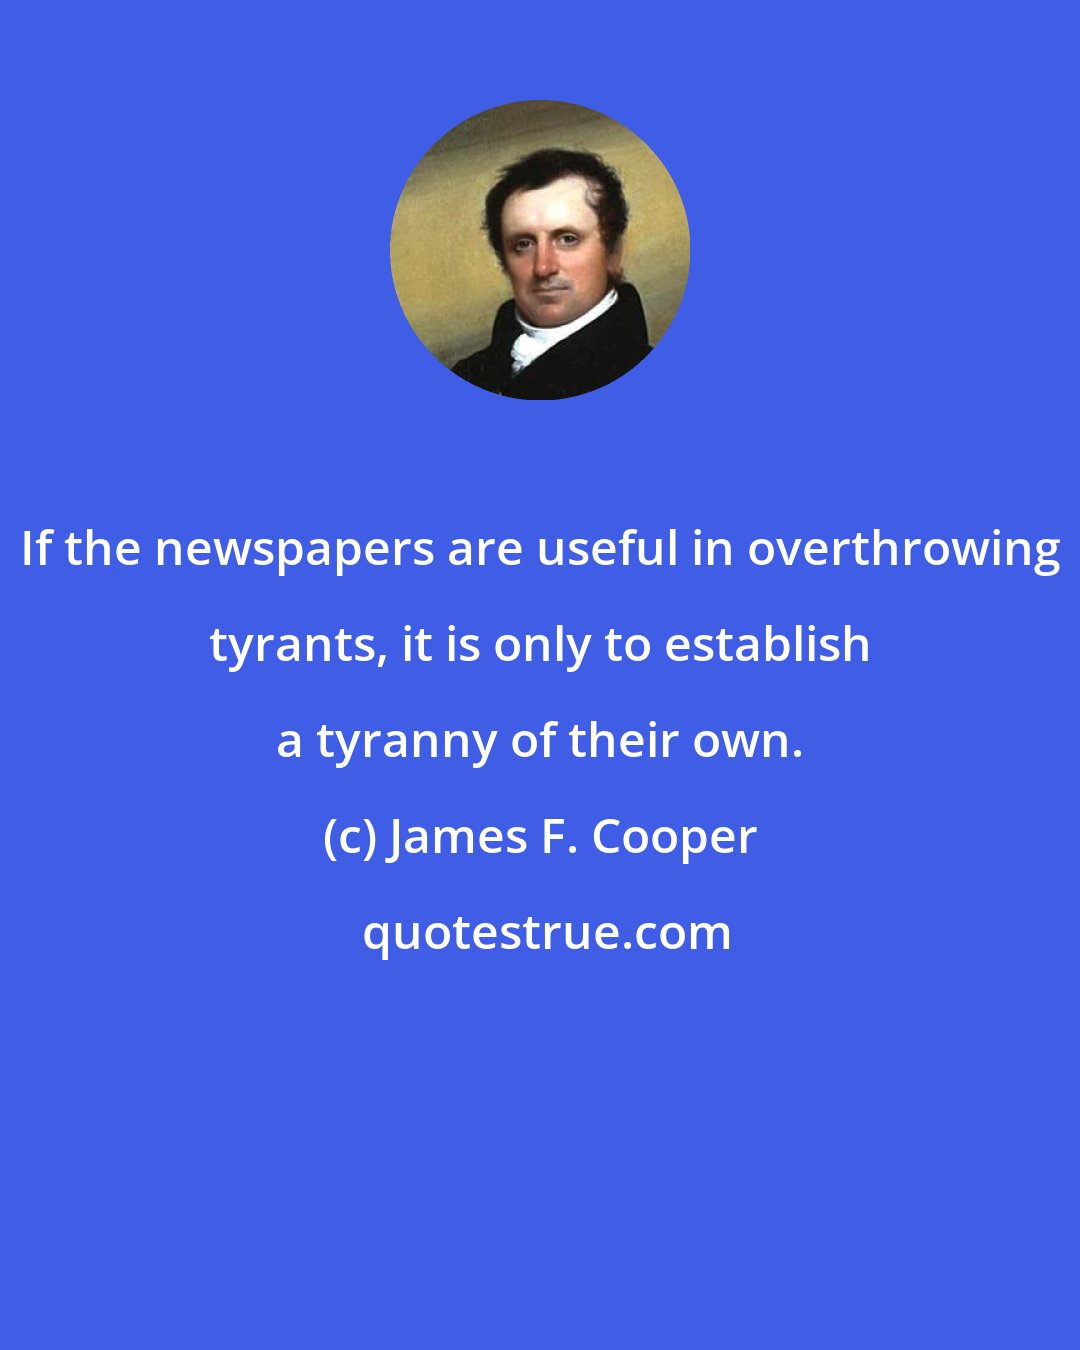 James F. Cooper: If the newspapers are useful in overthrowing tyrants, it is only to establish a tyranny of their own.